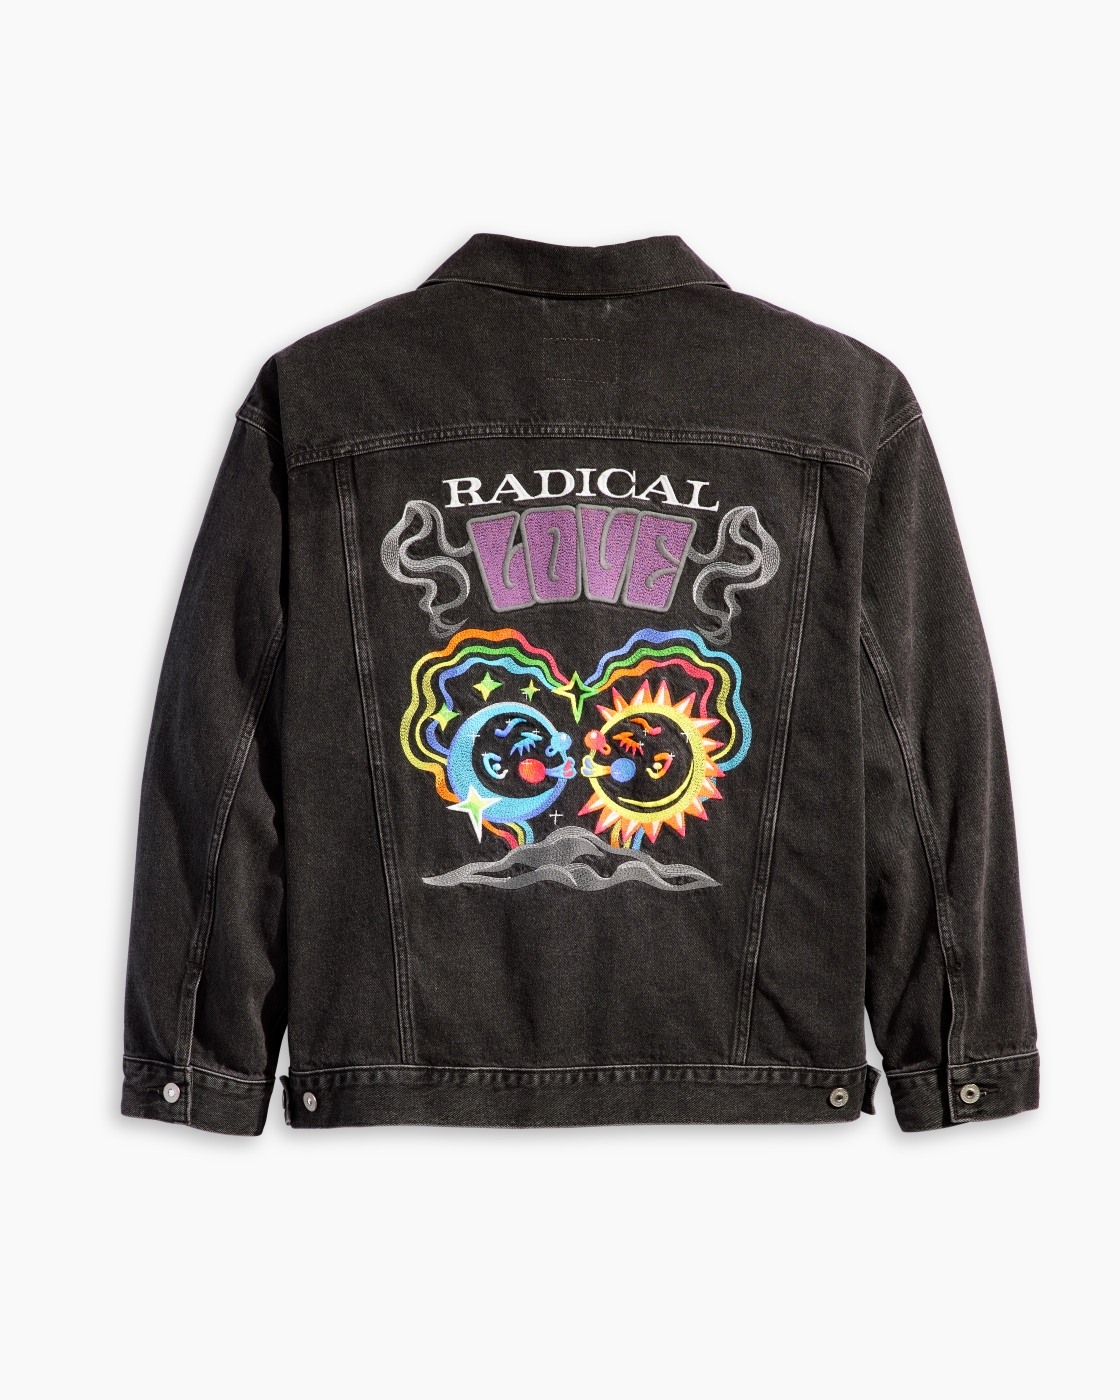 Back of the Levi’s Pride Liberation Trucker Jacket in black with the words “Radical Love” written over a graphic of two orbs kissing